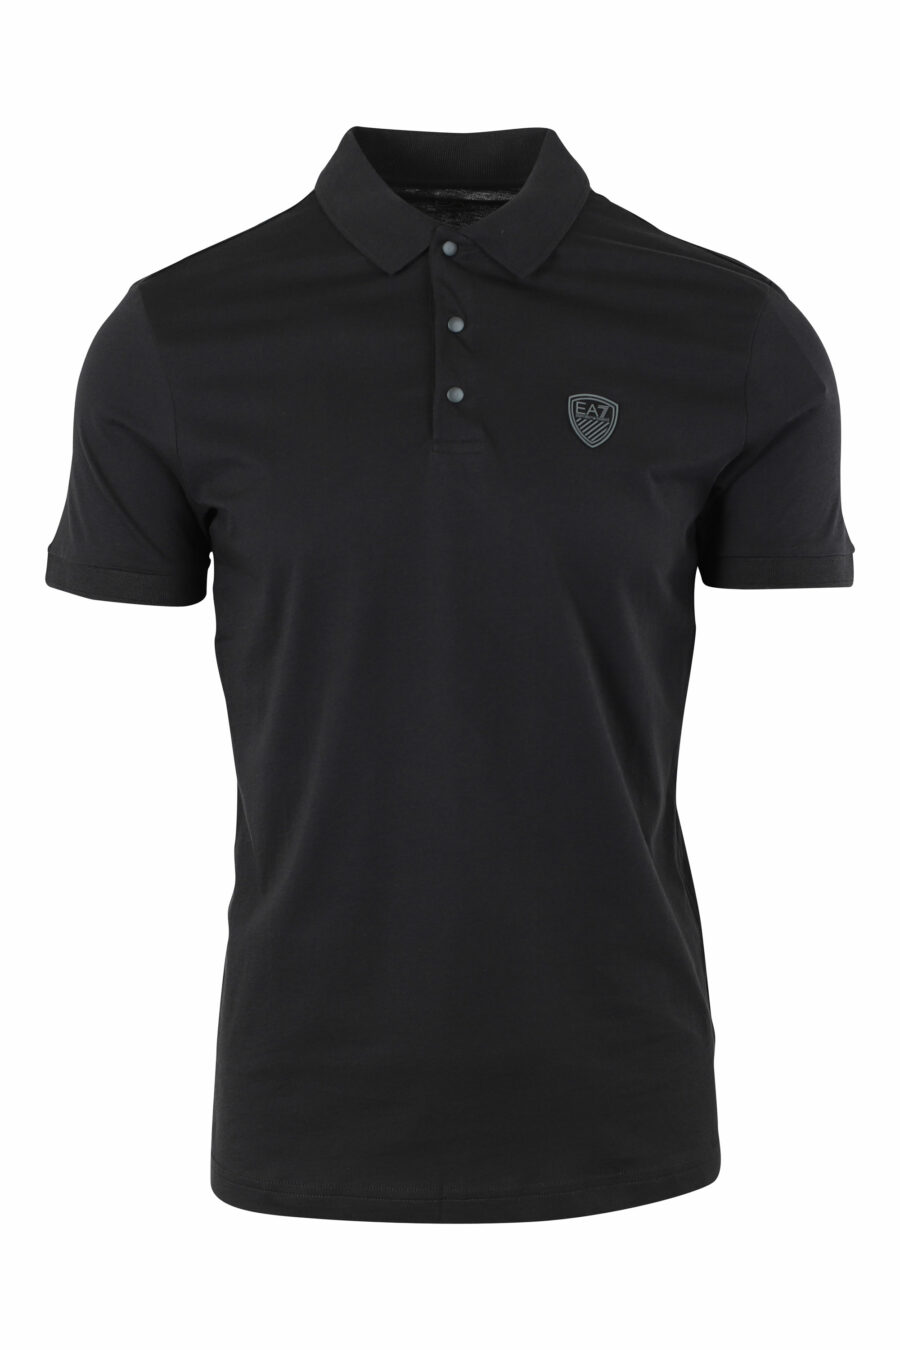 Black polo shirt with mini rubber badge - IMG 9656